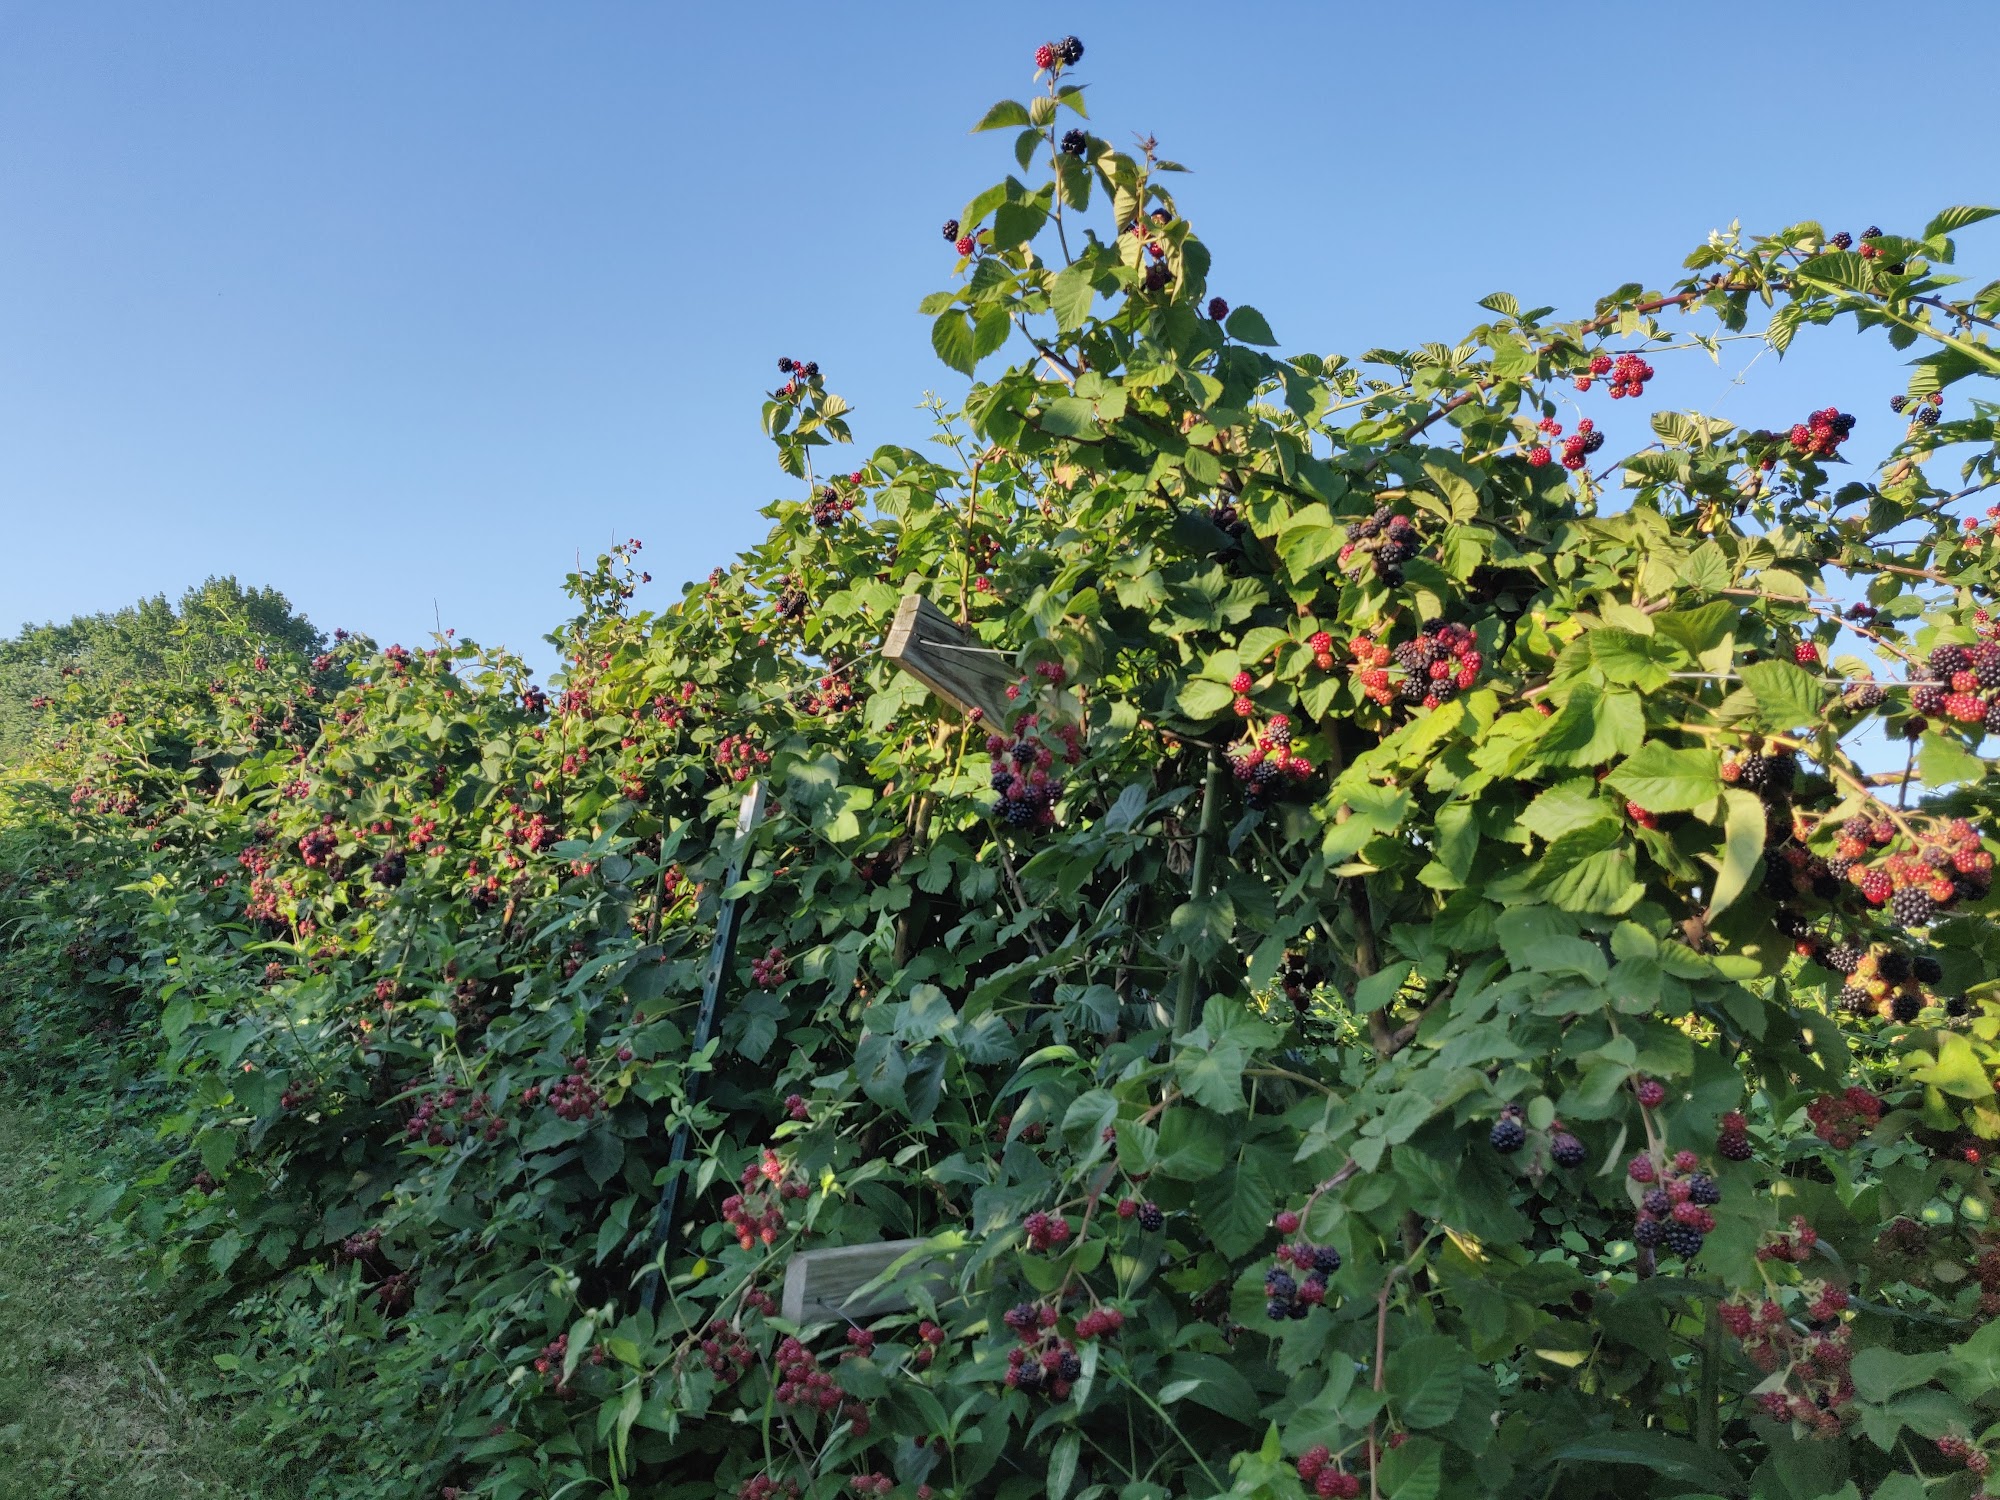 Thierbach Orchards & Berry Farm